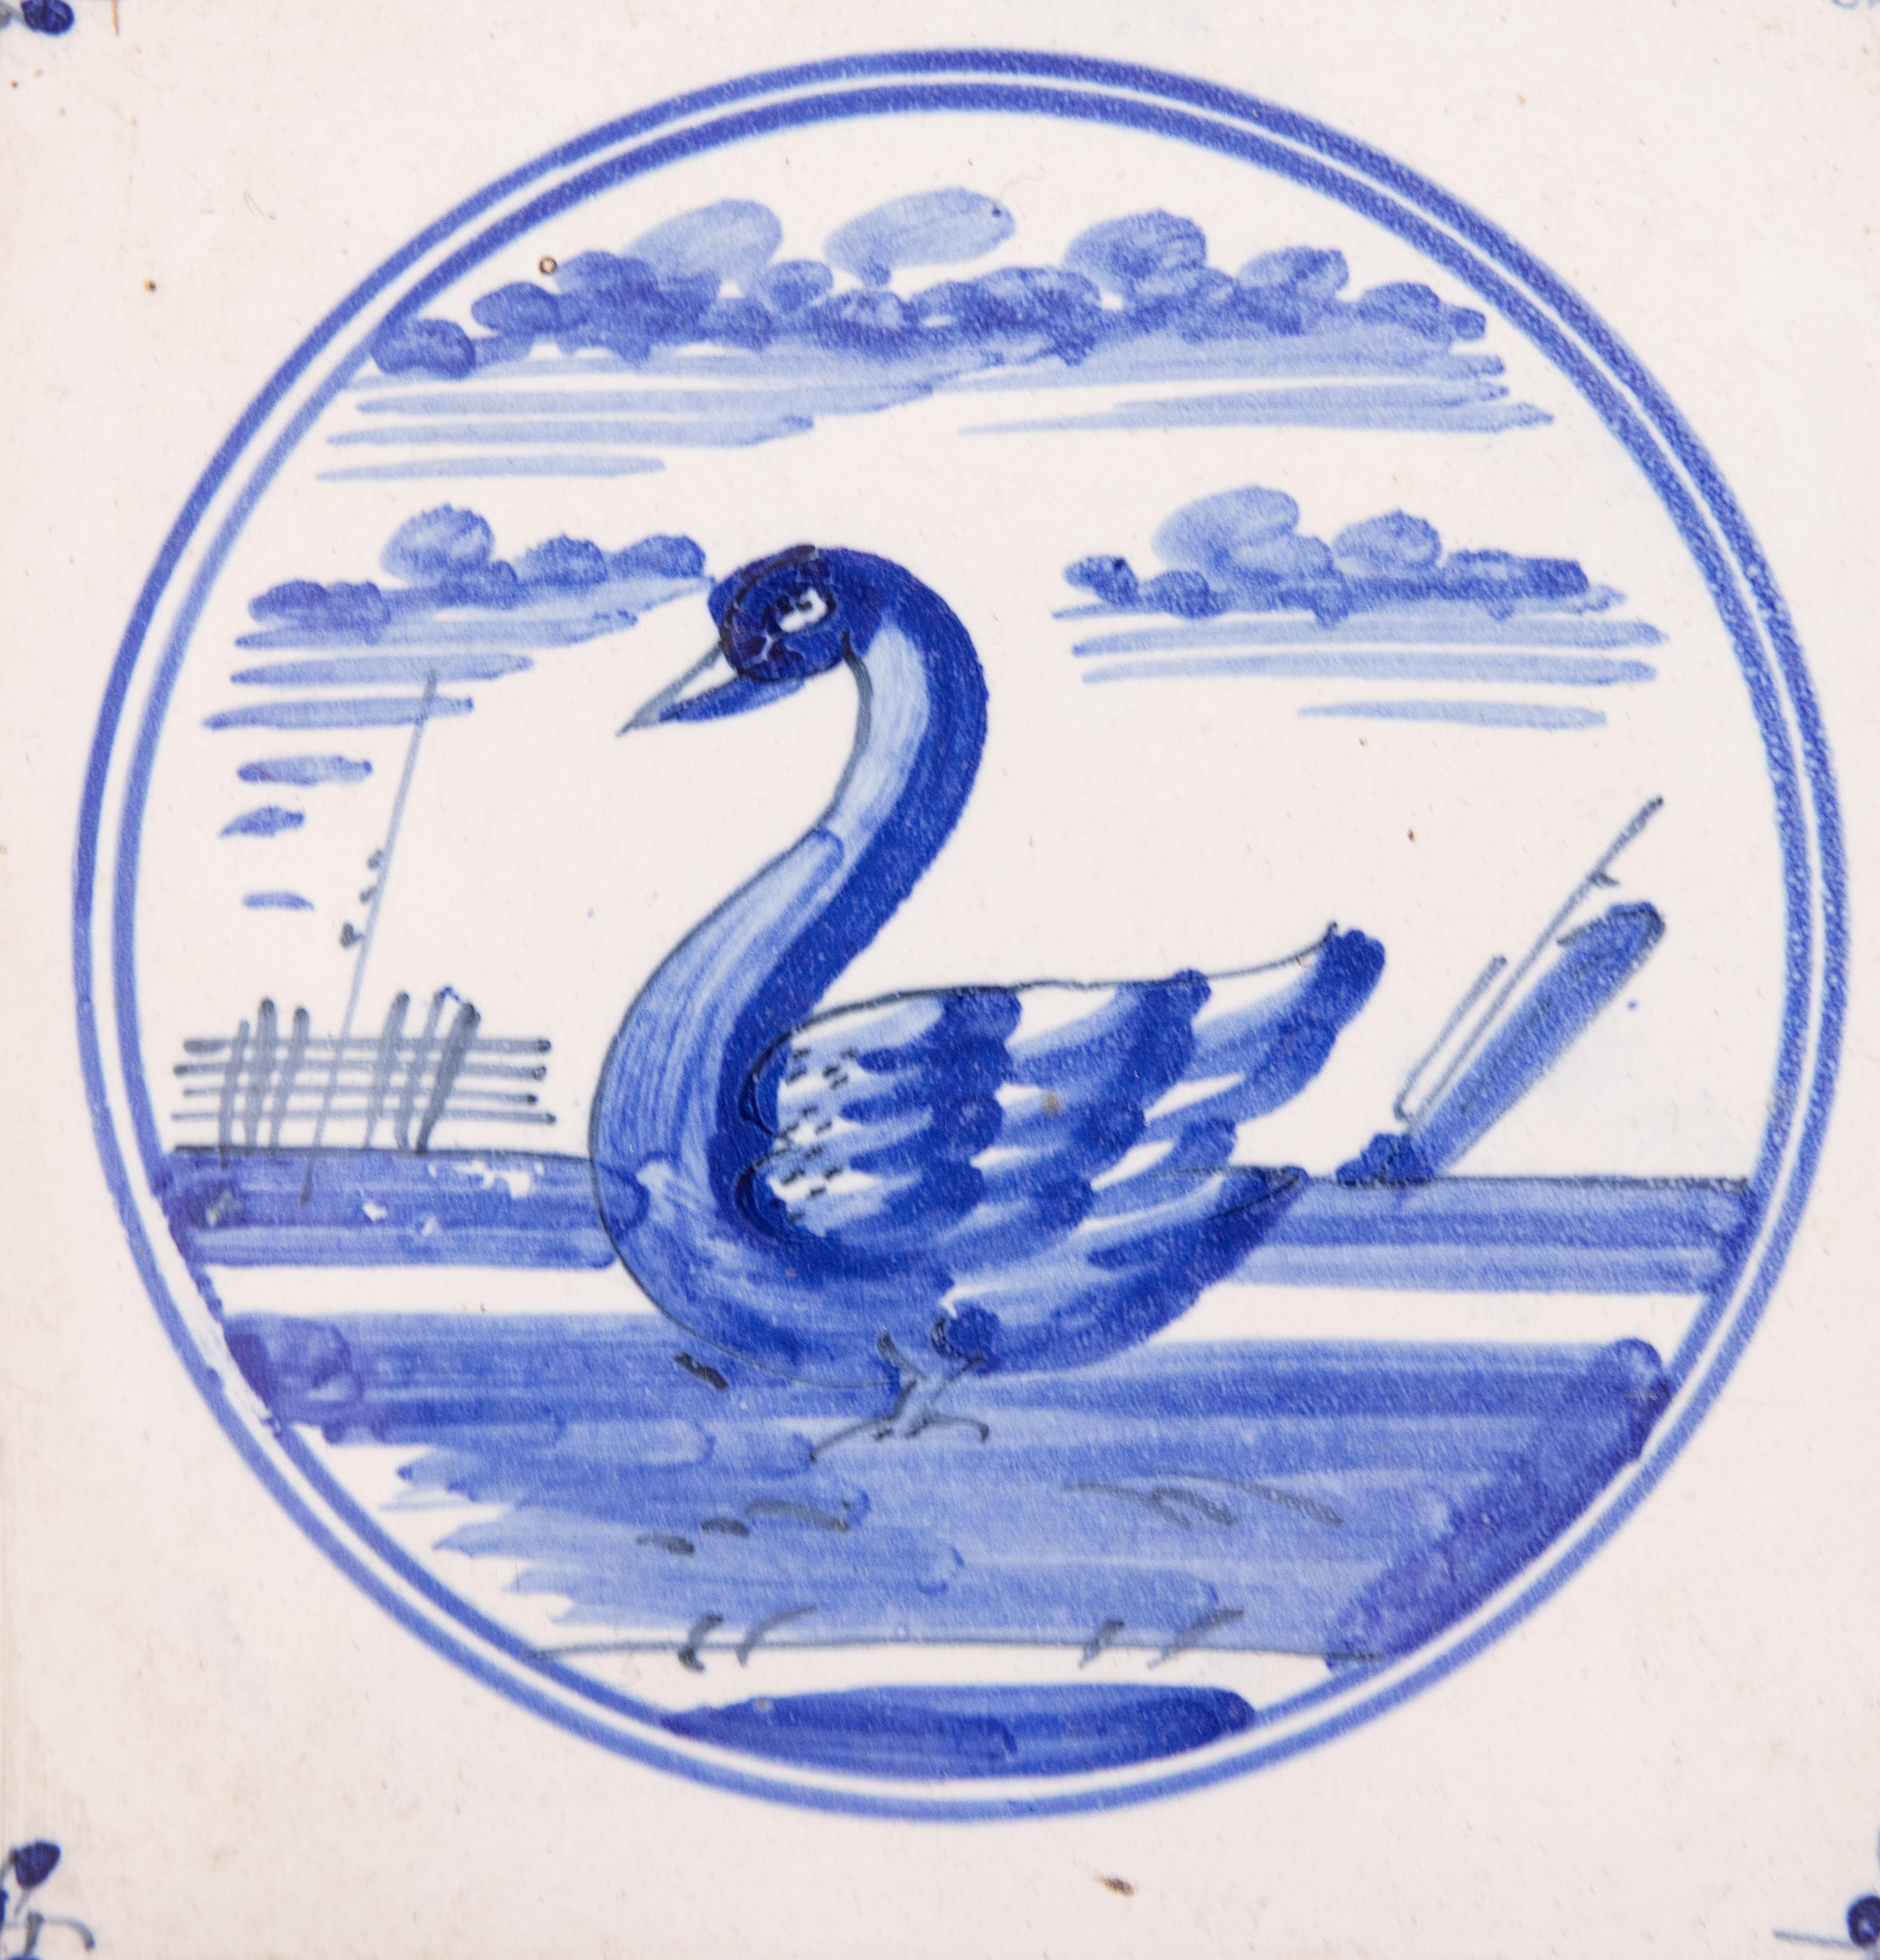 A charming set of three 18th-Century Dutch Delft faience hand molded tiles depicting swans and a Dutch country home hand painted in cobalt blue and white. The tiles are in a custom mahogany frame and are ready to hang.

DIMENSIONS
17.25ʺW × 1.2ʺD ×